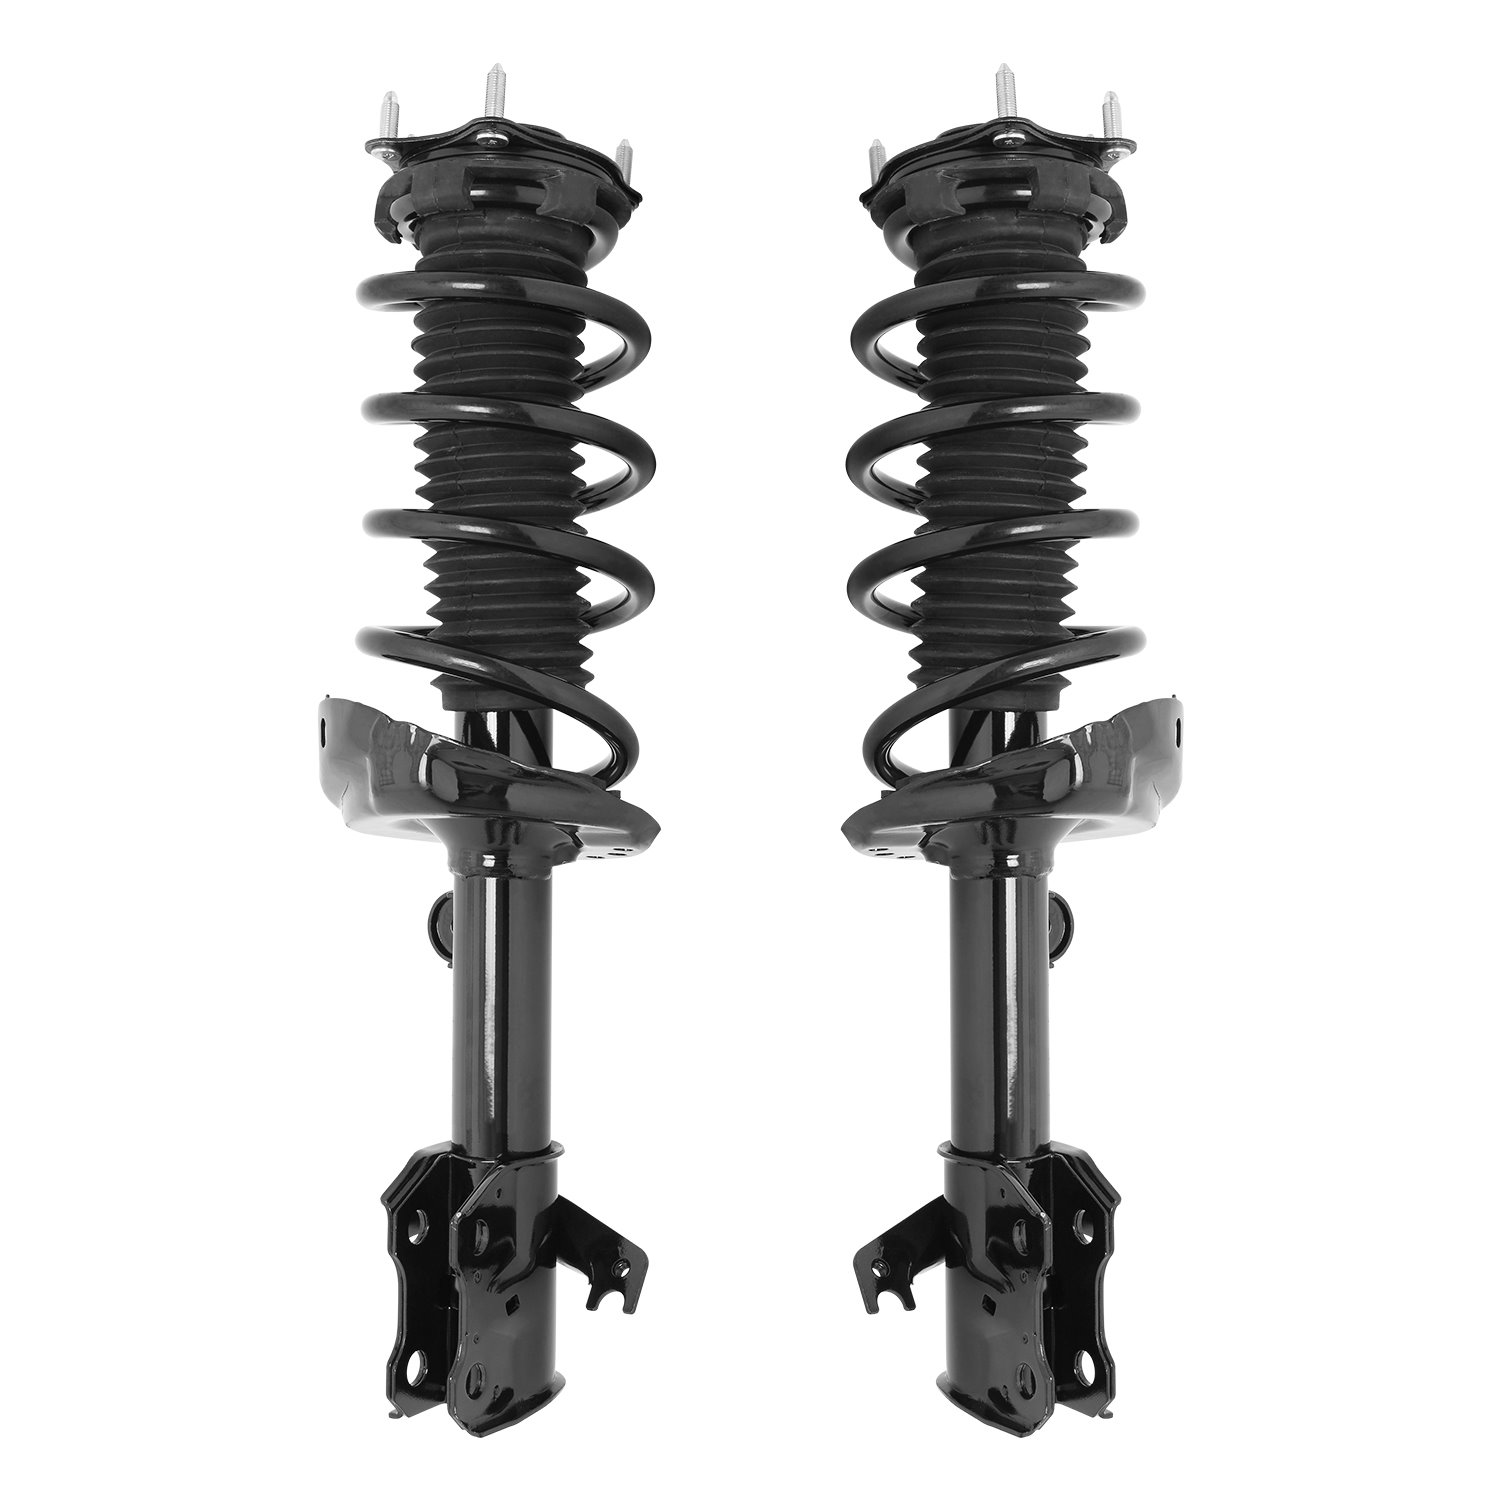 2-11607-11608-001 Suspension Strut & Coil Spring Assembly Set Fits Select Acura RDX